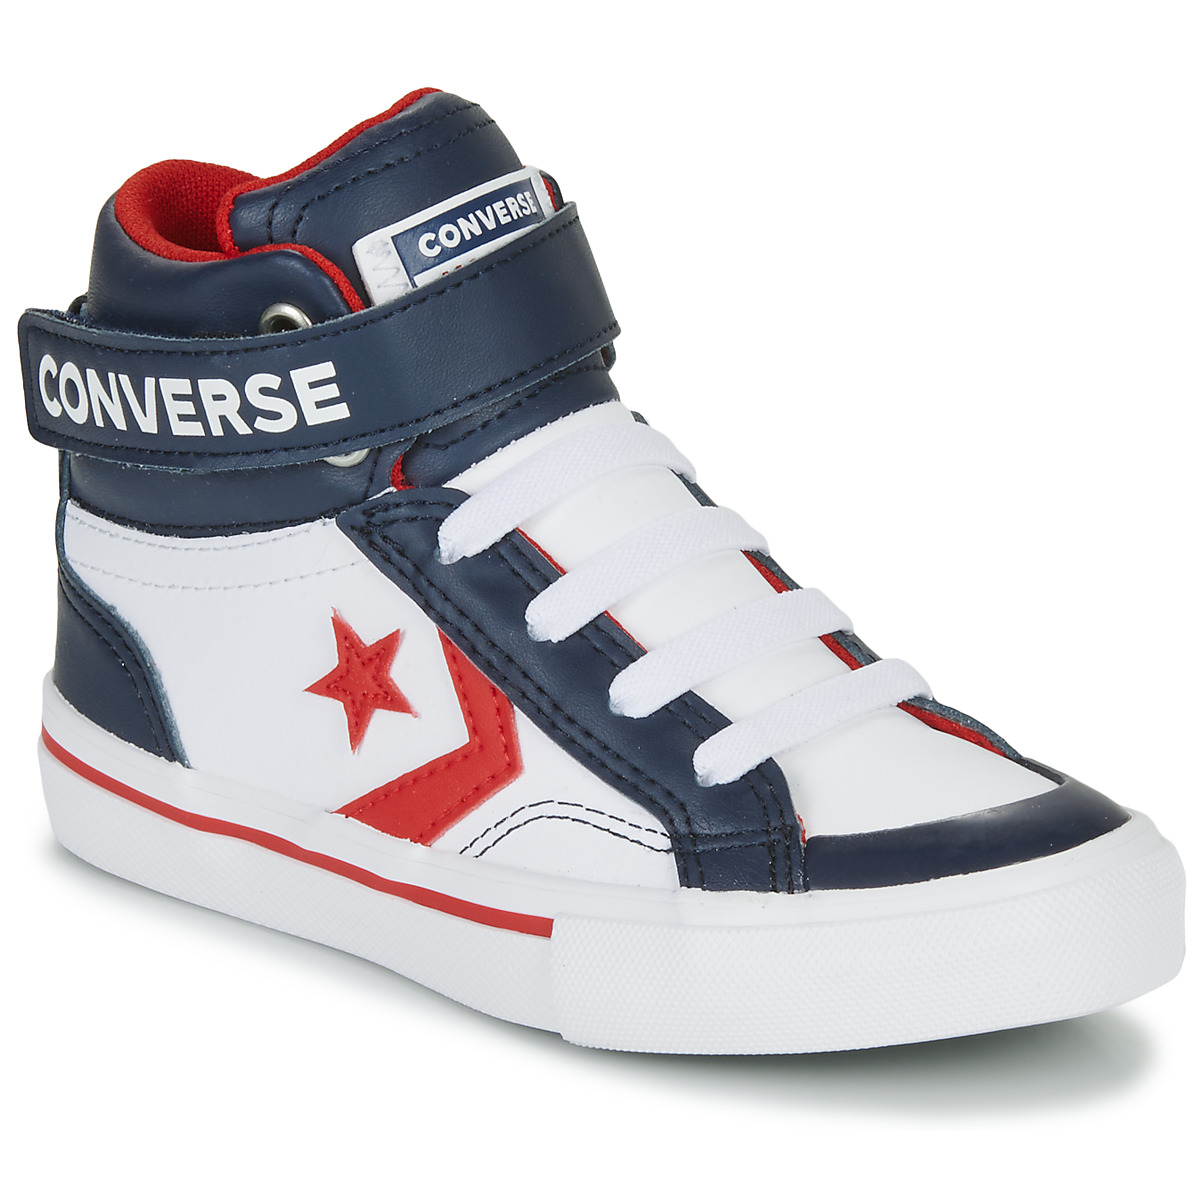 Converse Pro Blaze € Child | top Hi delivery Spartoo / 48,80 High trainers ! - Fast Europe Shoes White - Blue Strap